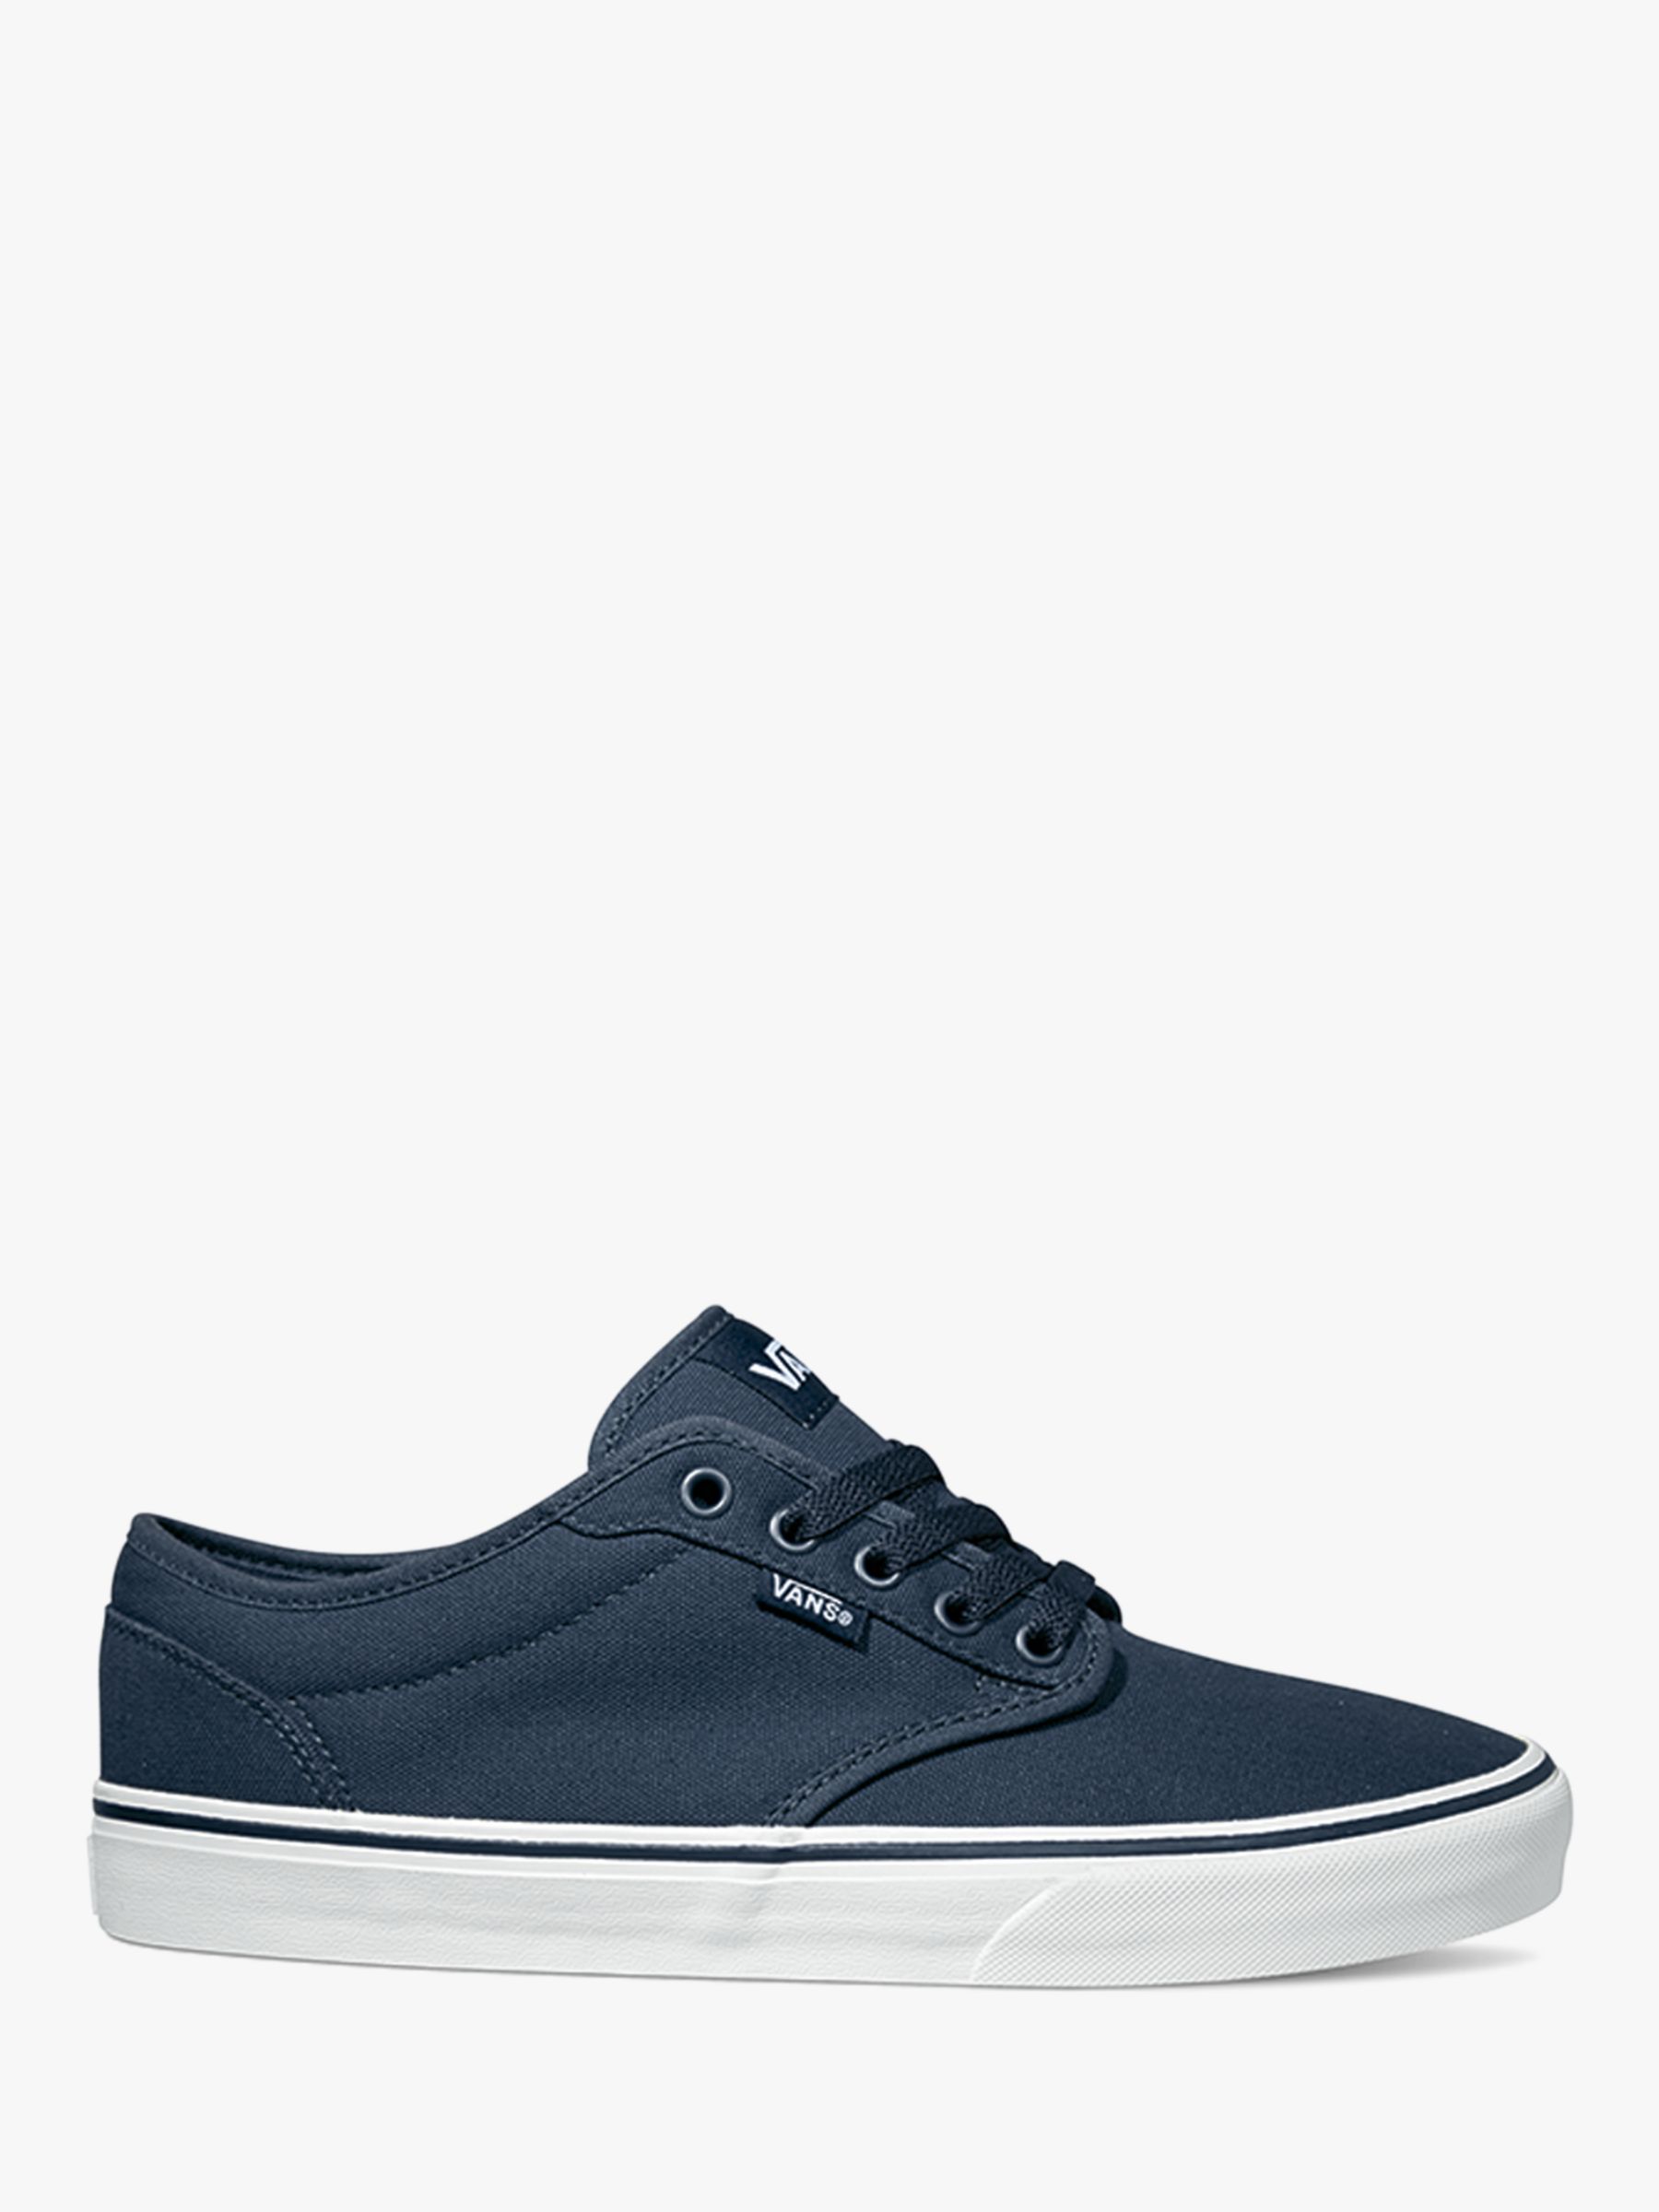 vans atwood mens canvas trainers